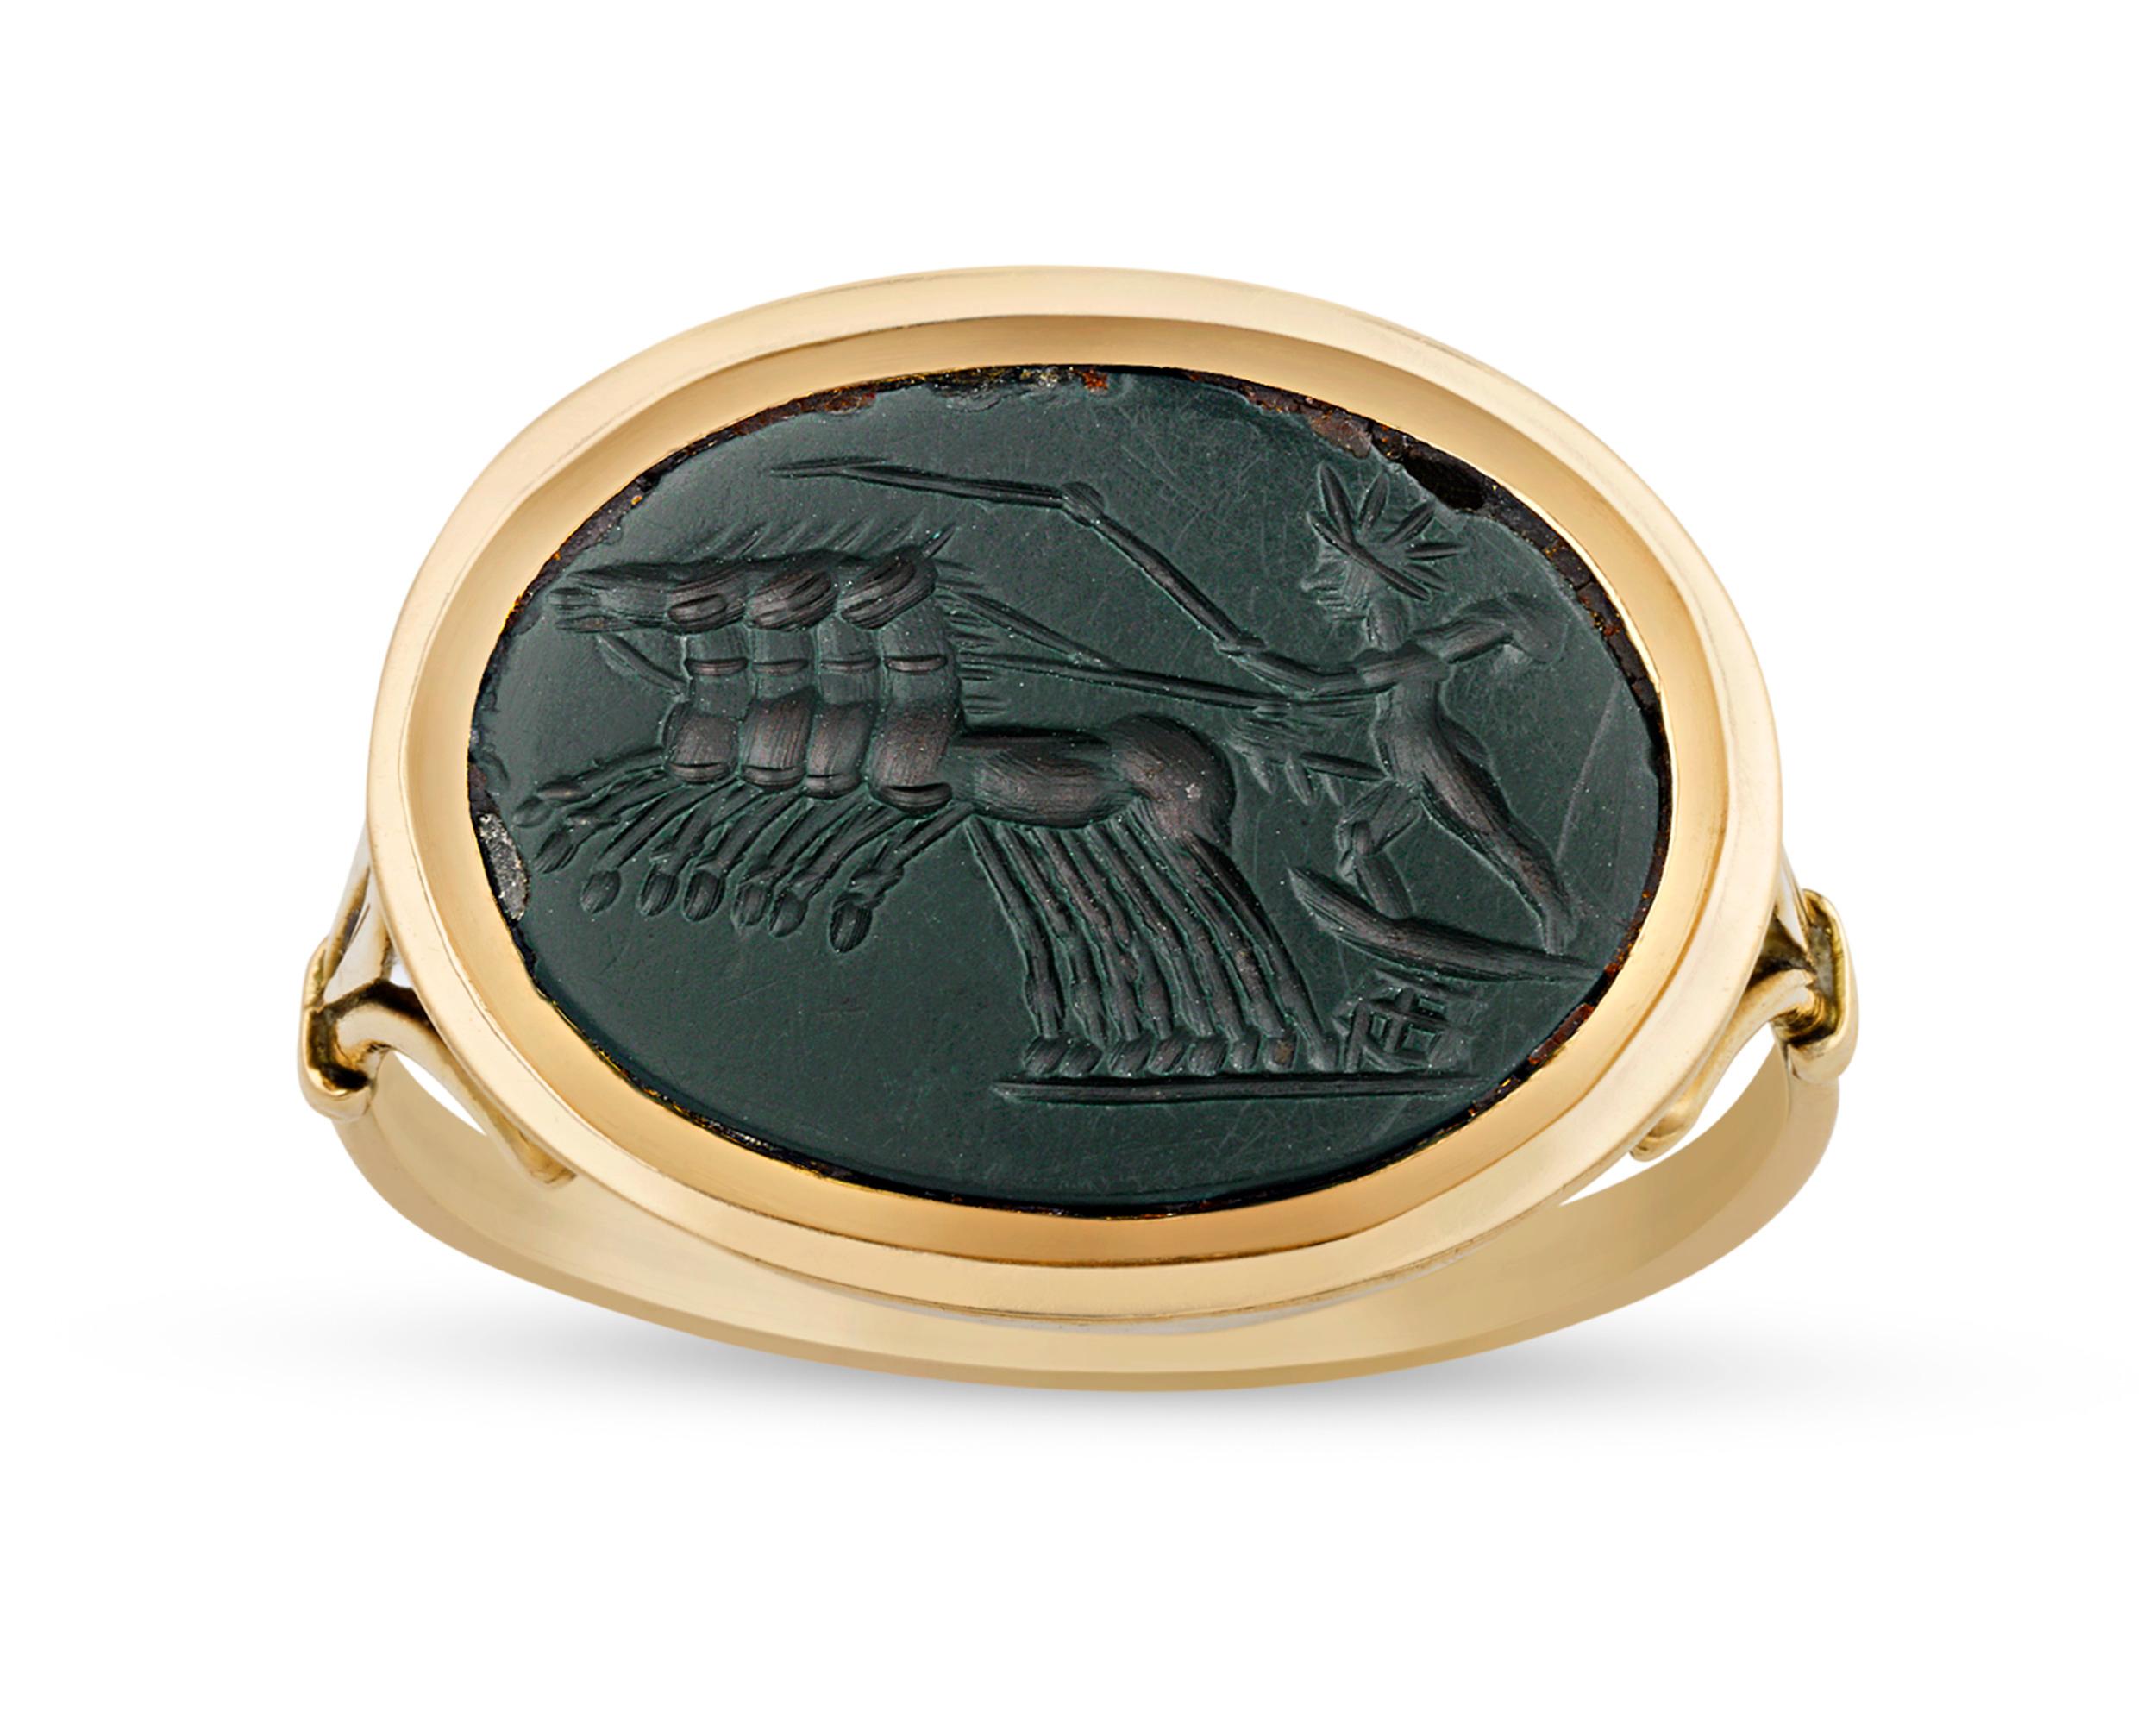 This remarkably rare Roman green jasper gem is carved in intaglio with a scene depicting the sun god Helios in his chariot. According to mythology, Helios traversed the sun in his golden chariot during the day, and by night sailed the ocean in a